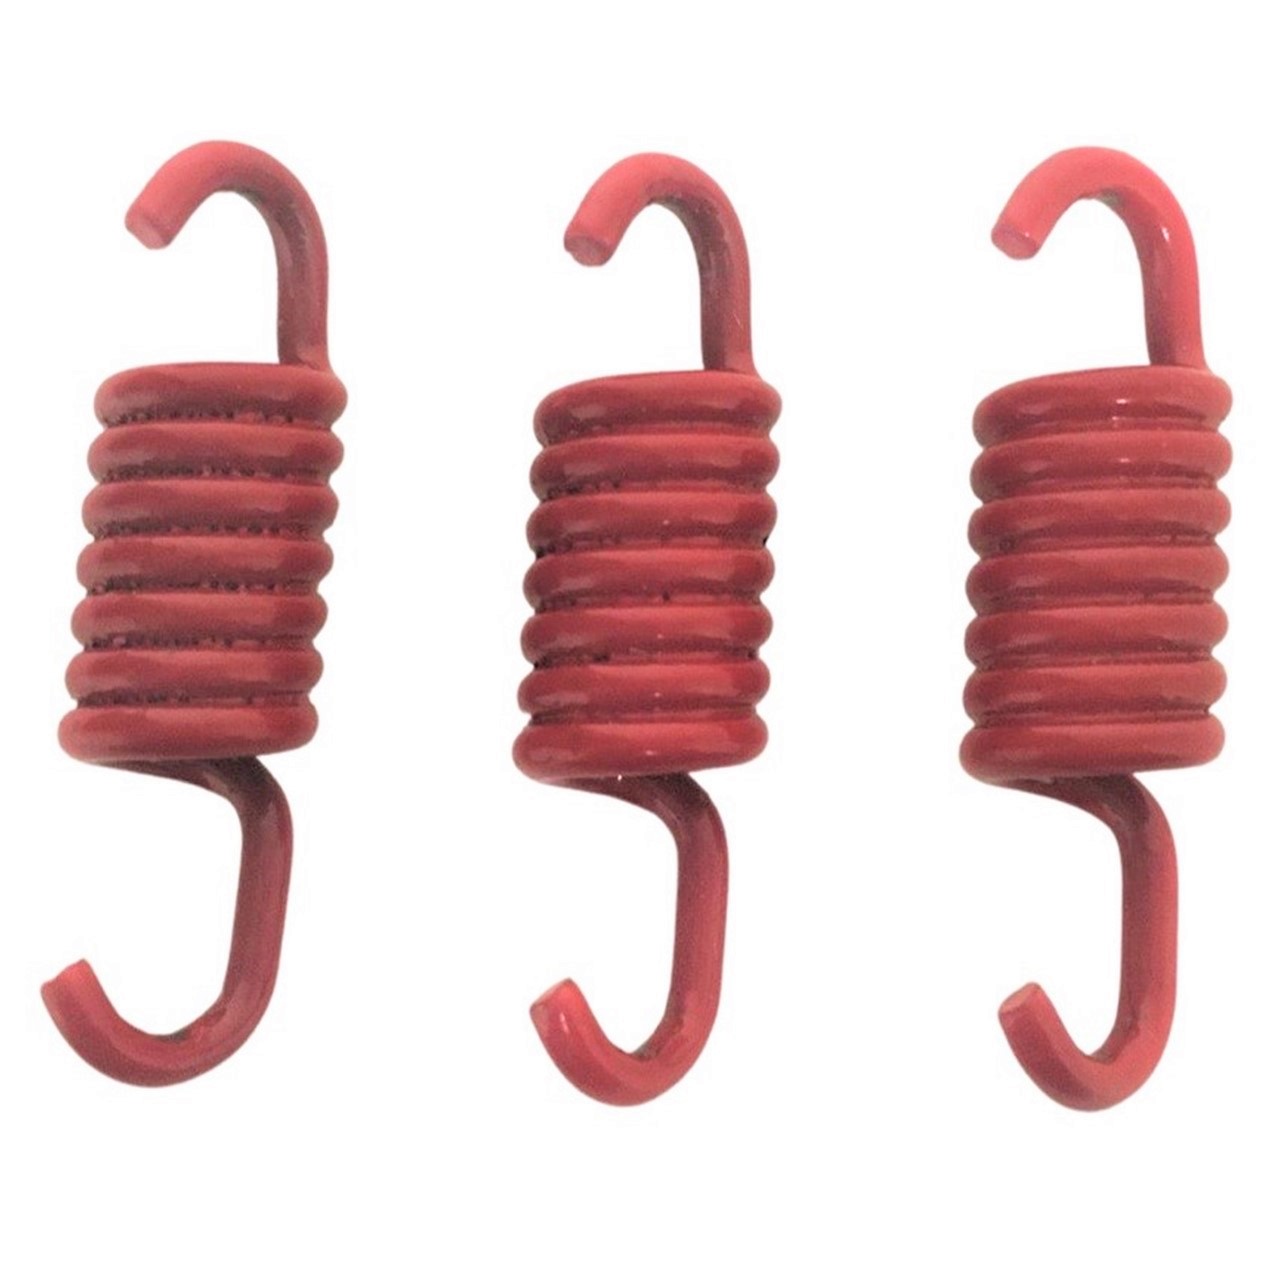 Clutch Spring Set HIGH PERFORMANCE Red +2000 RPM GY6-50 QMB139 49cc Chinese Scooter Motors - Click Image to Close